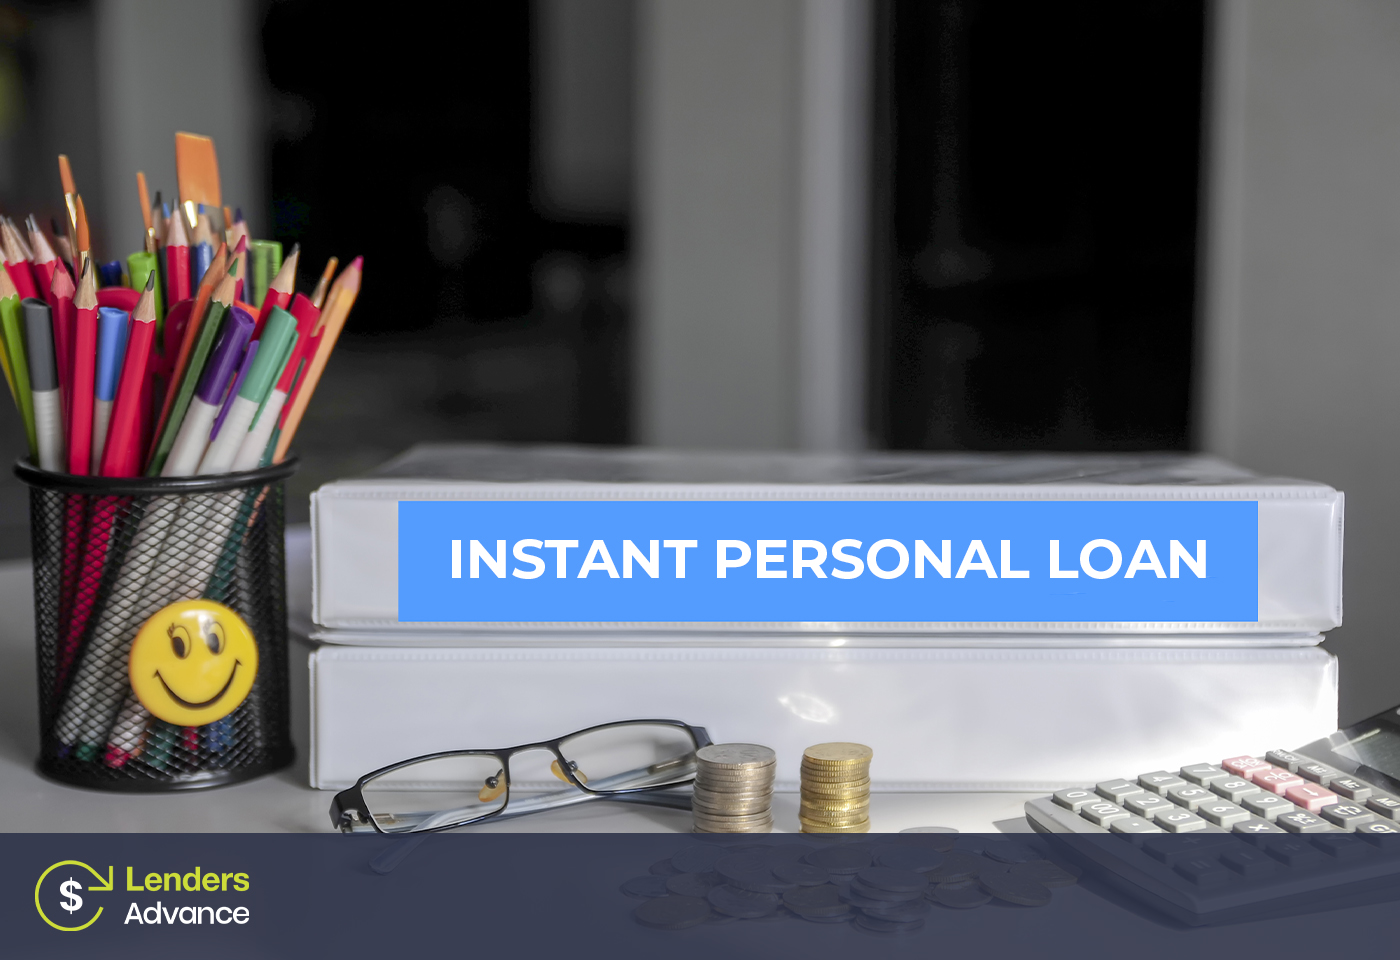 Instant Personal Loans. Is it Real?